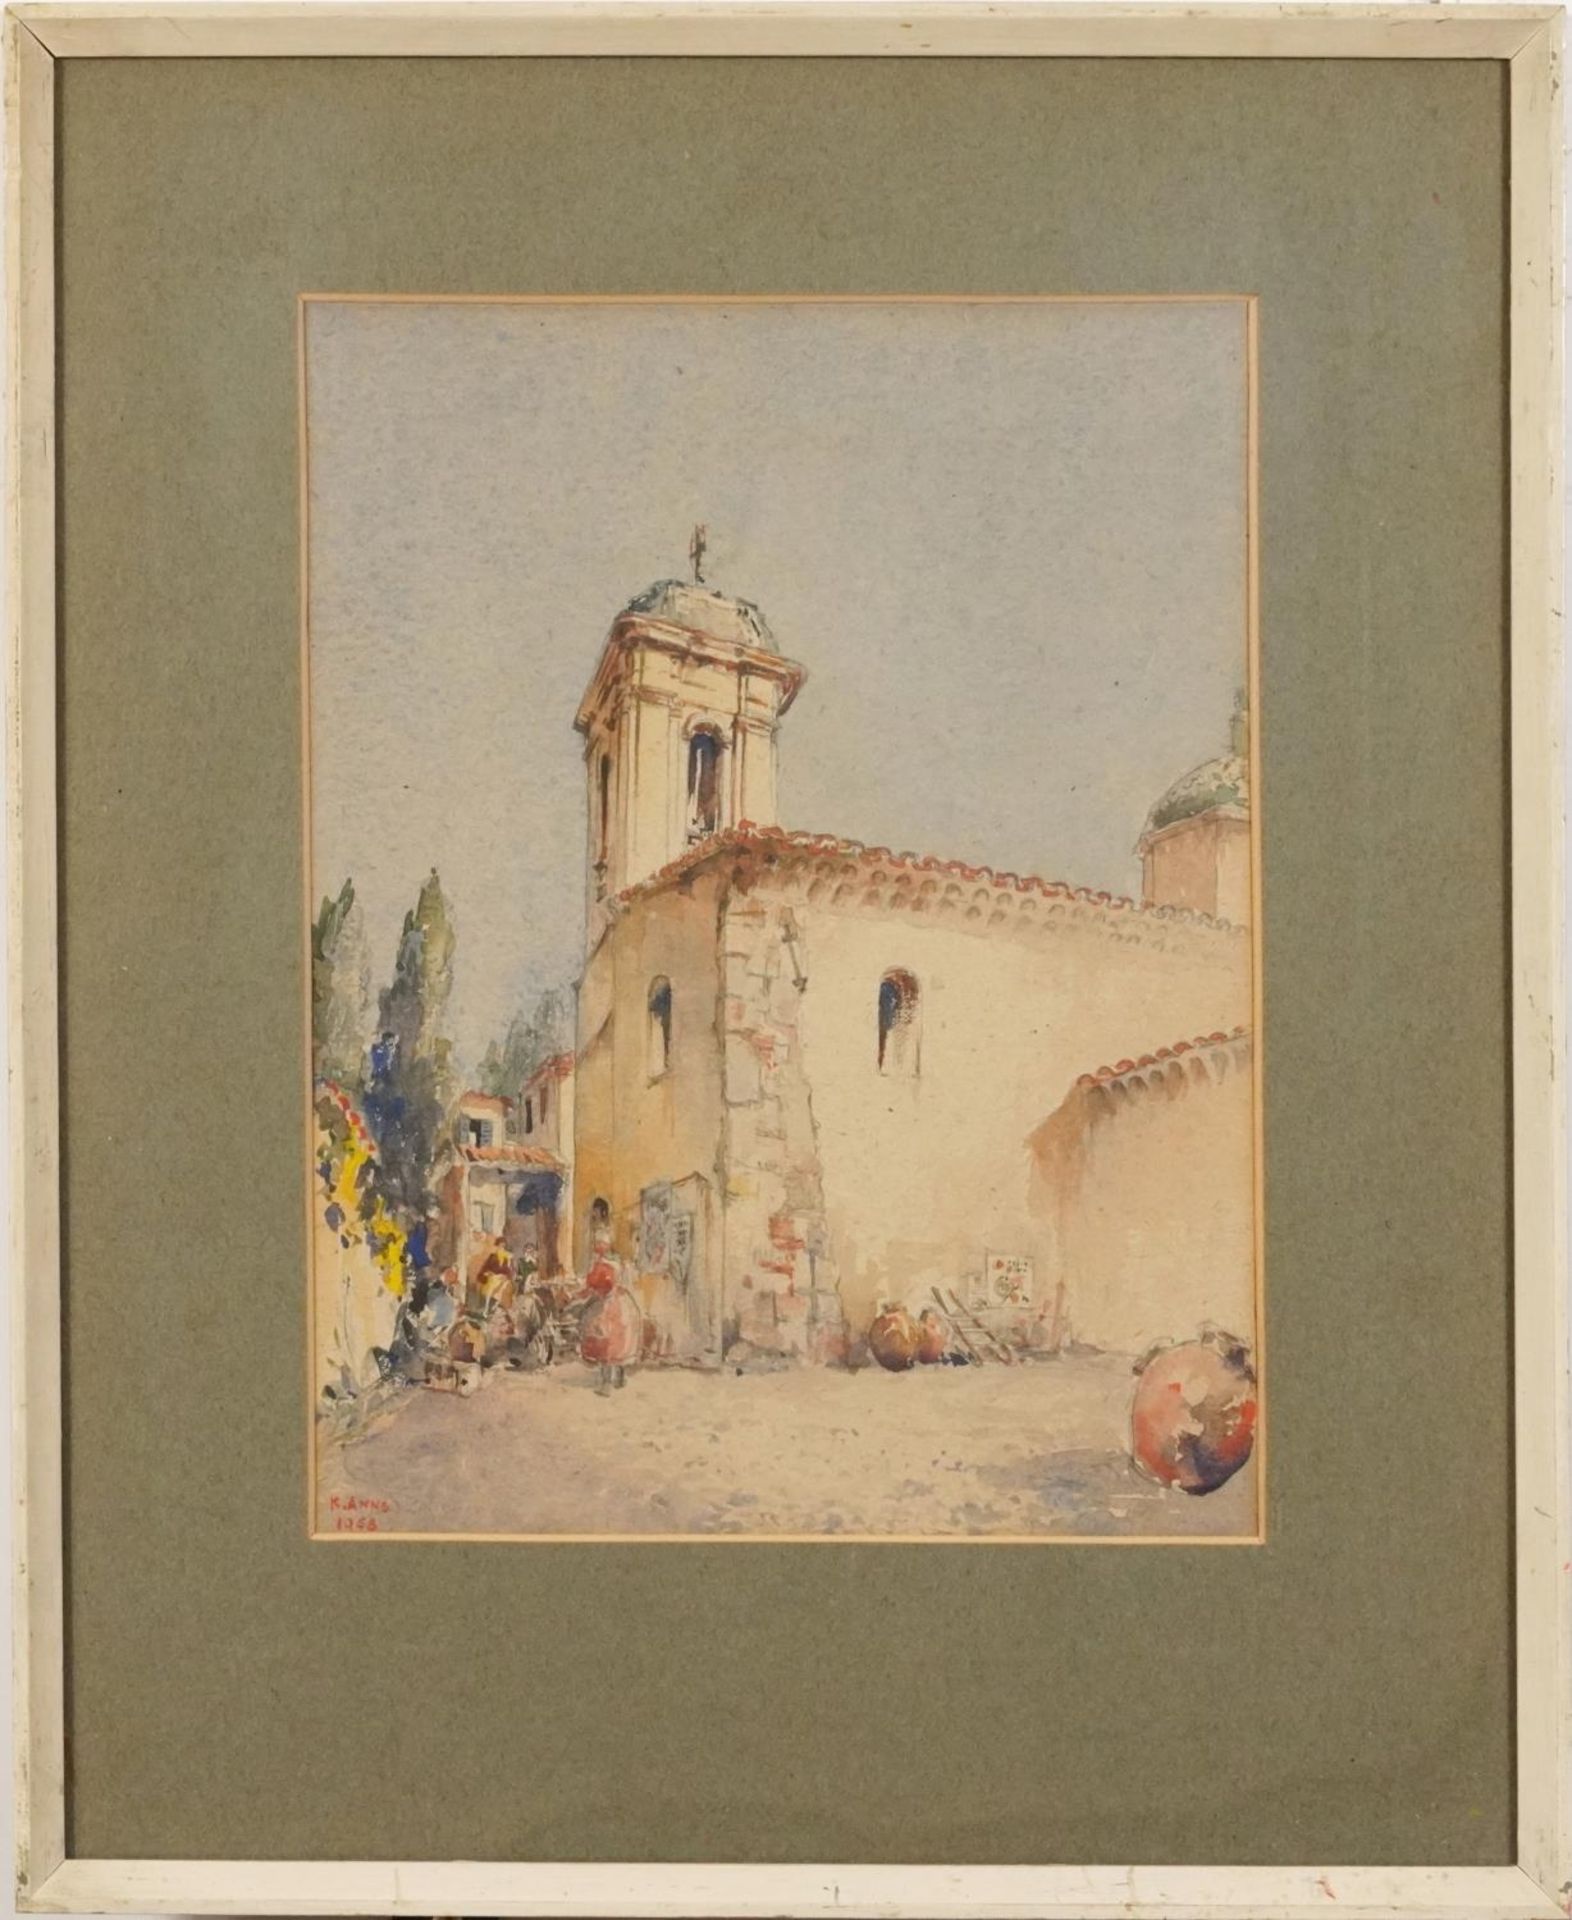 Kenneth Anns 1953 - Figures before a tower, mid 20th century watercolour, biography and various - Image 4 of 12